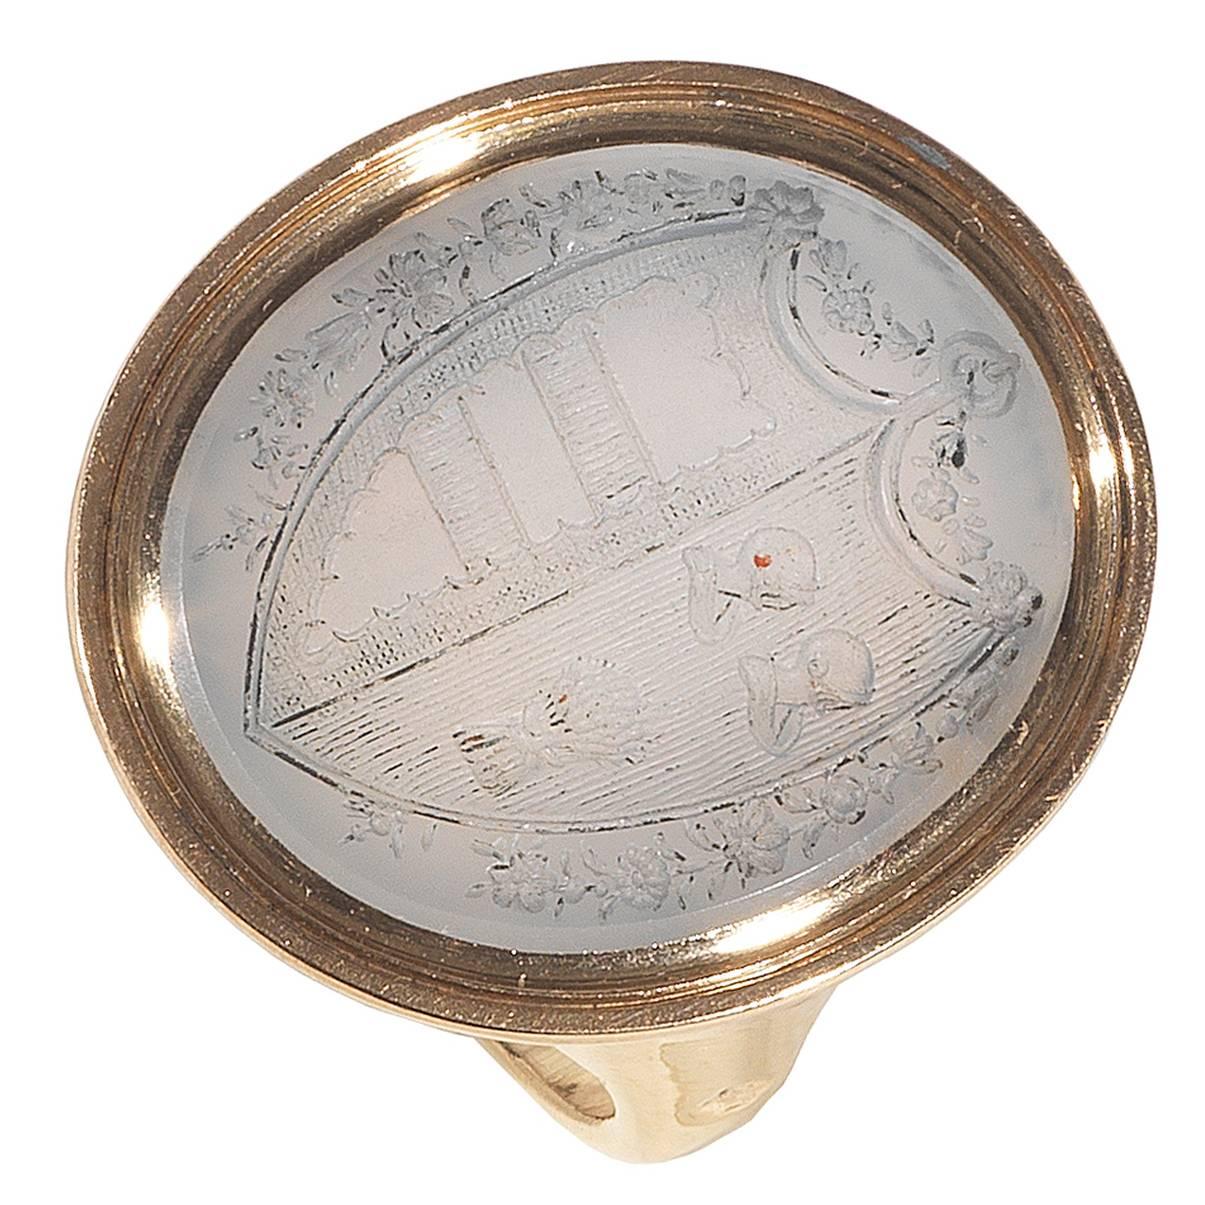 
PLEASE NOTE: OUR PRICE IS FULLY INCLUSIVE OF SHIPPING, IMPORTATION TAXES & DUTIES.

The oval shaped bezel with white chalcedony intaglio engraved with a coat of arms depicting a shield shaped crest divided in two sections, one of which